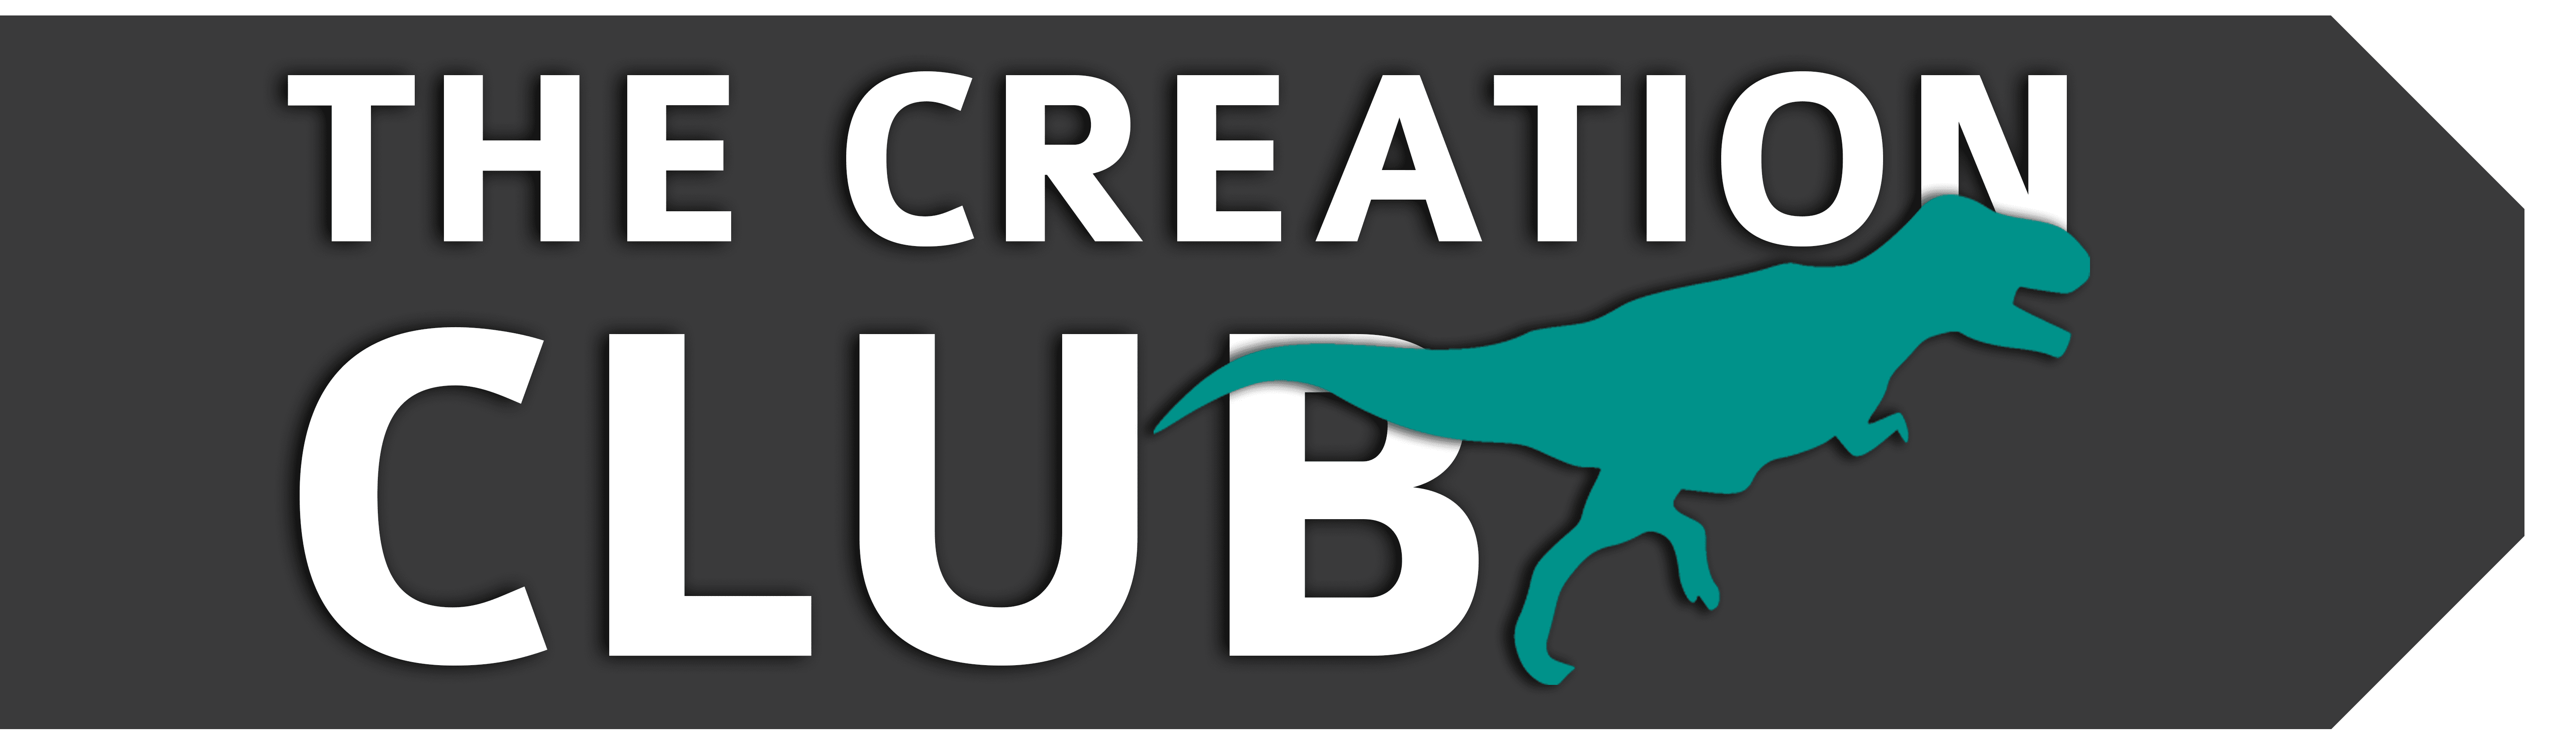 The Creation Club | A Place for Biblical Creationists to Share and Learn